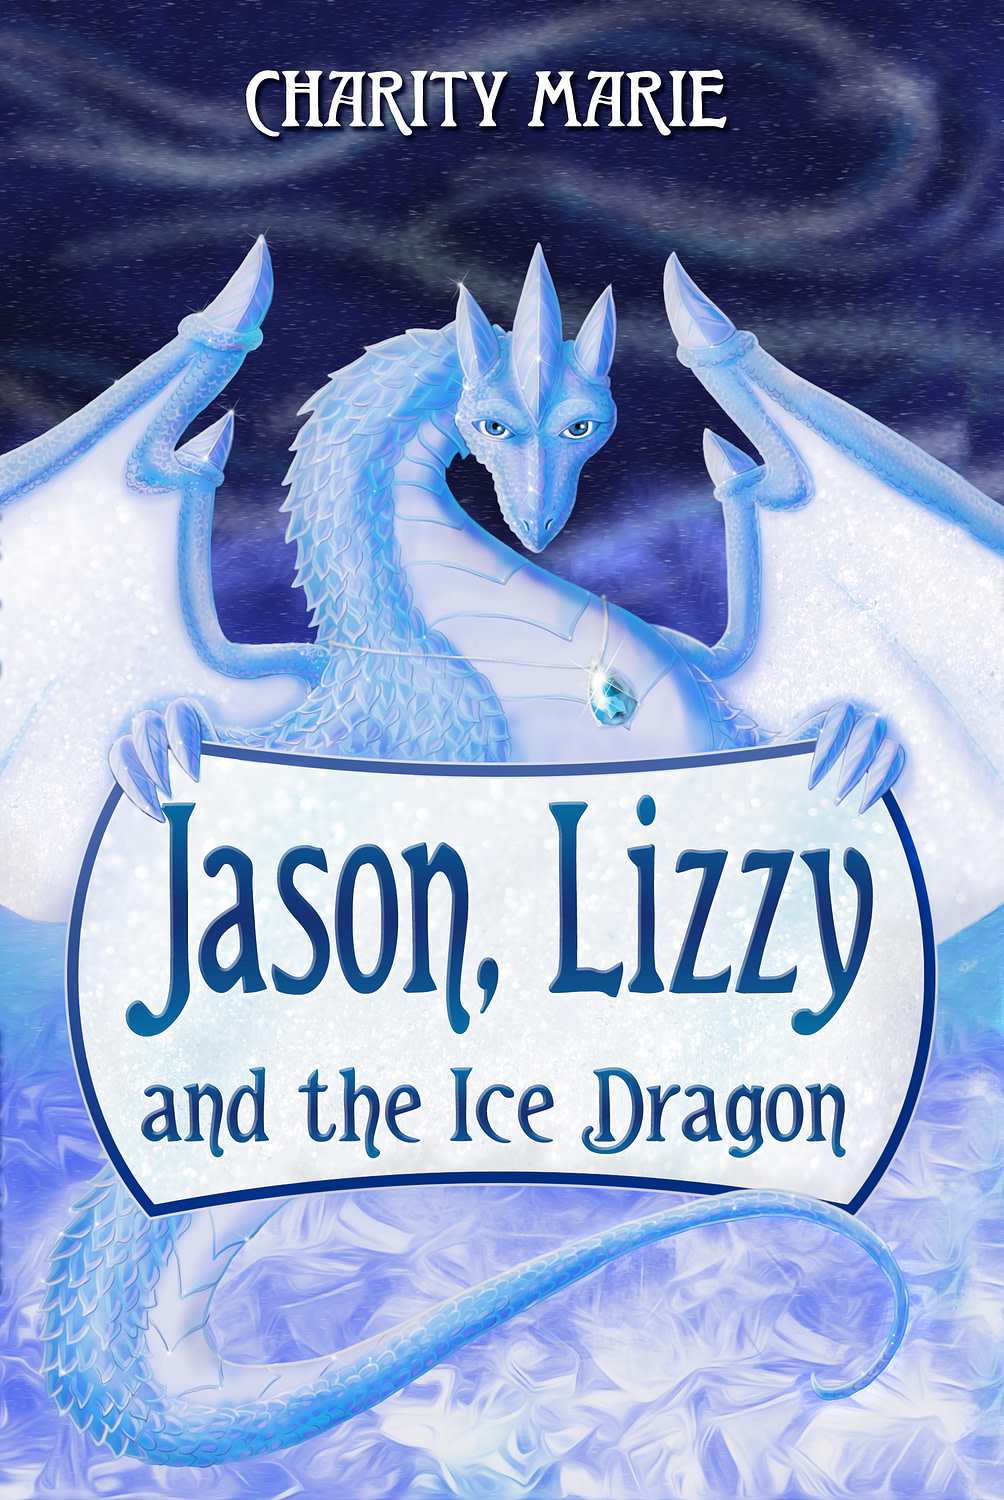 Jason, Lizzy and the Ice Dragon | Charity Marie | Author